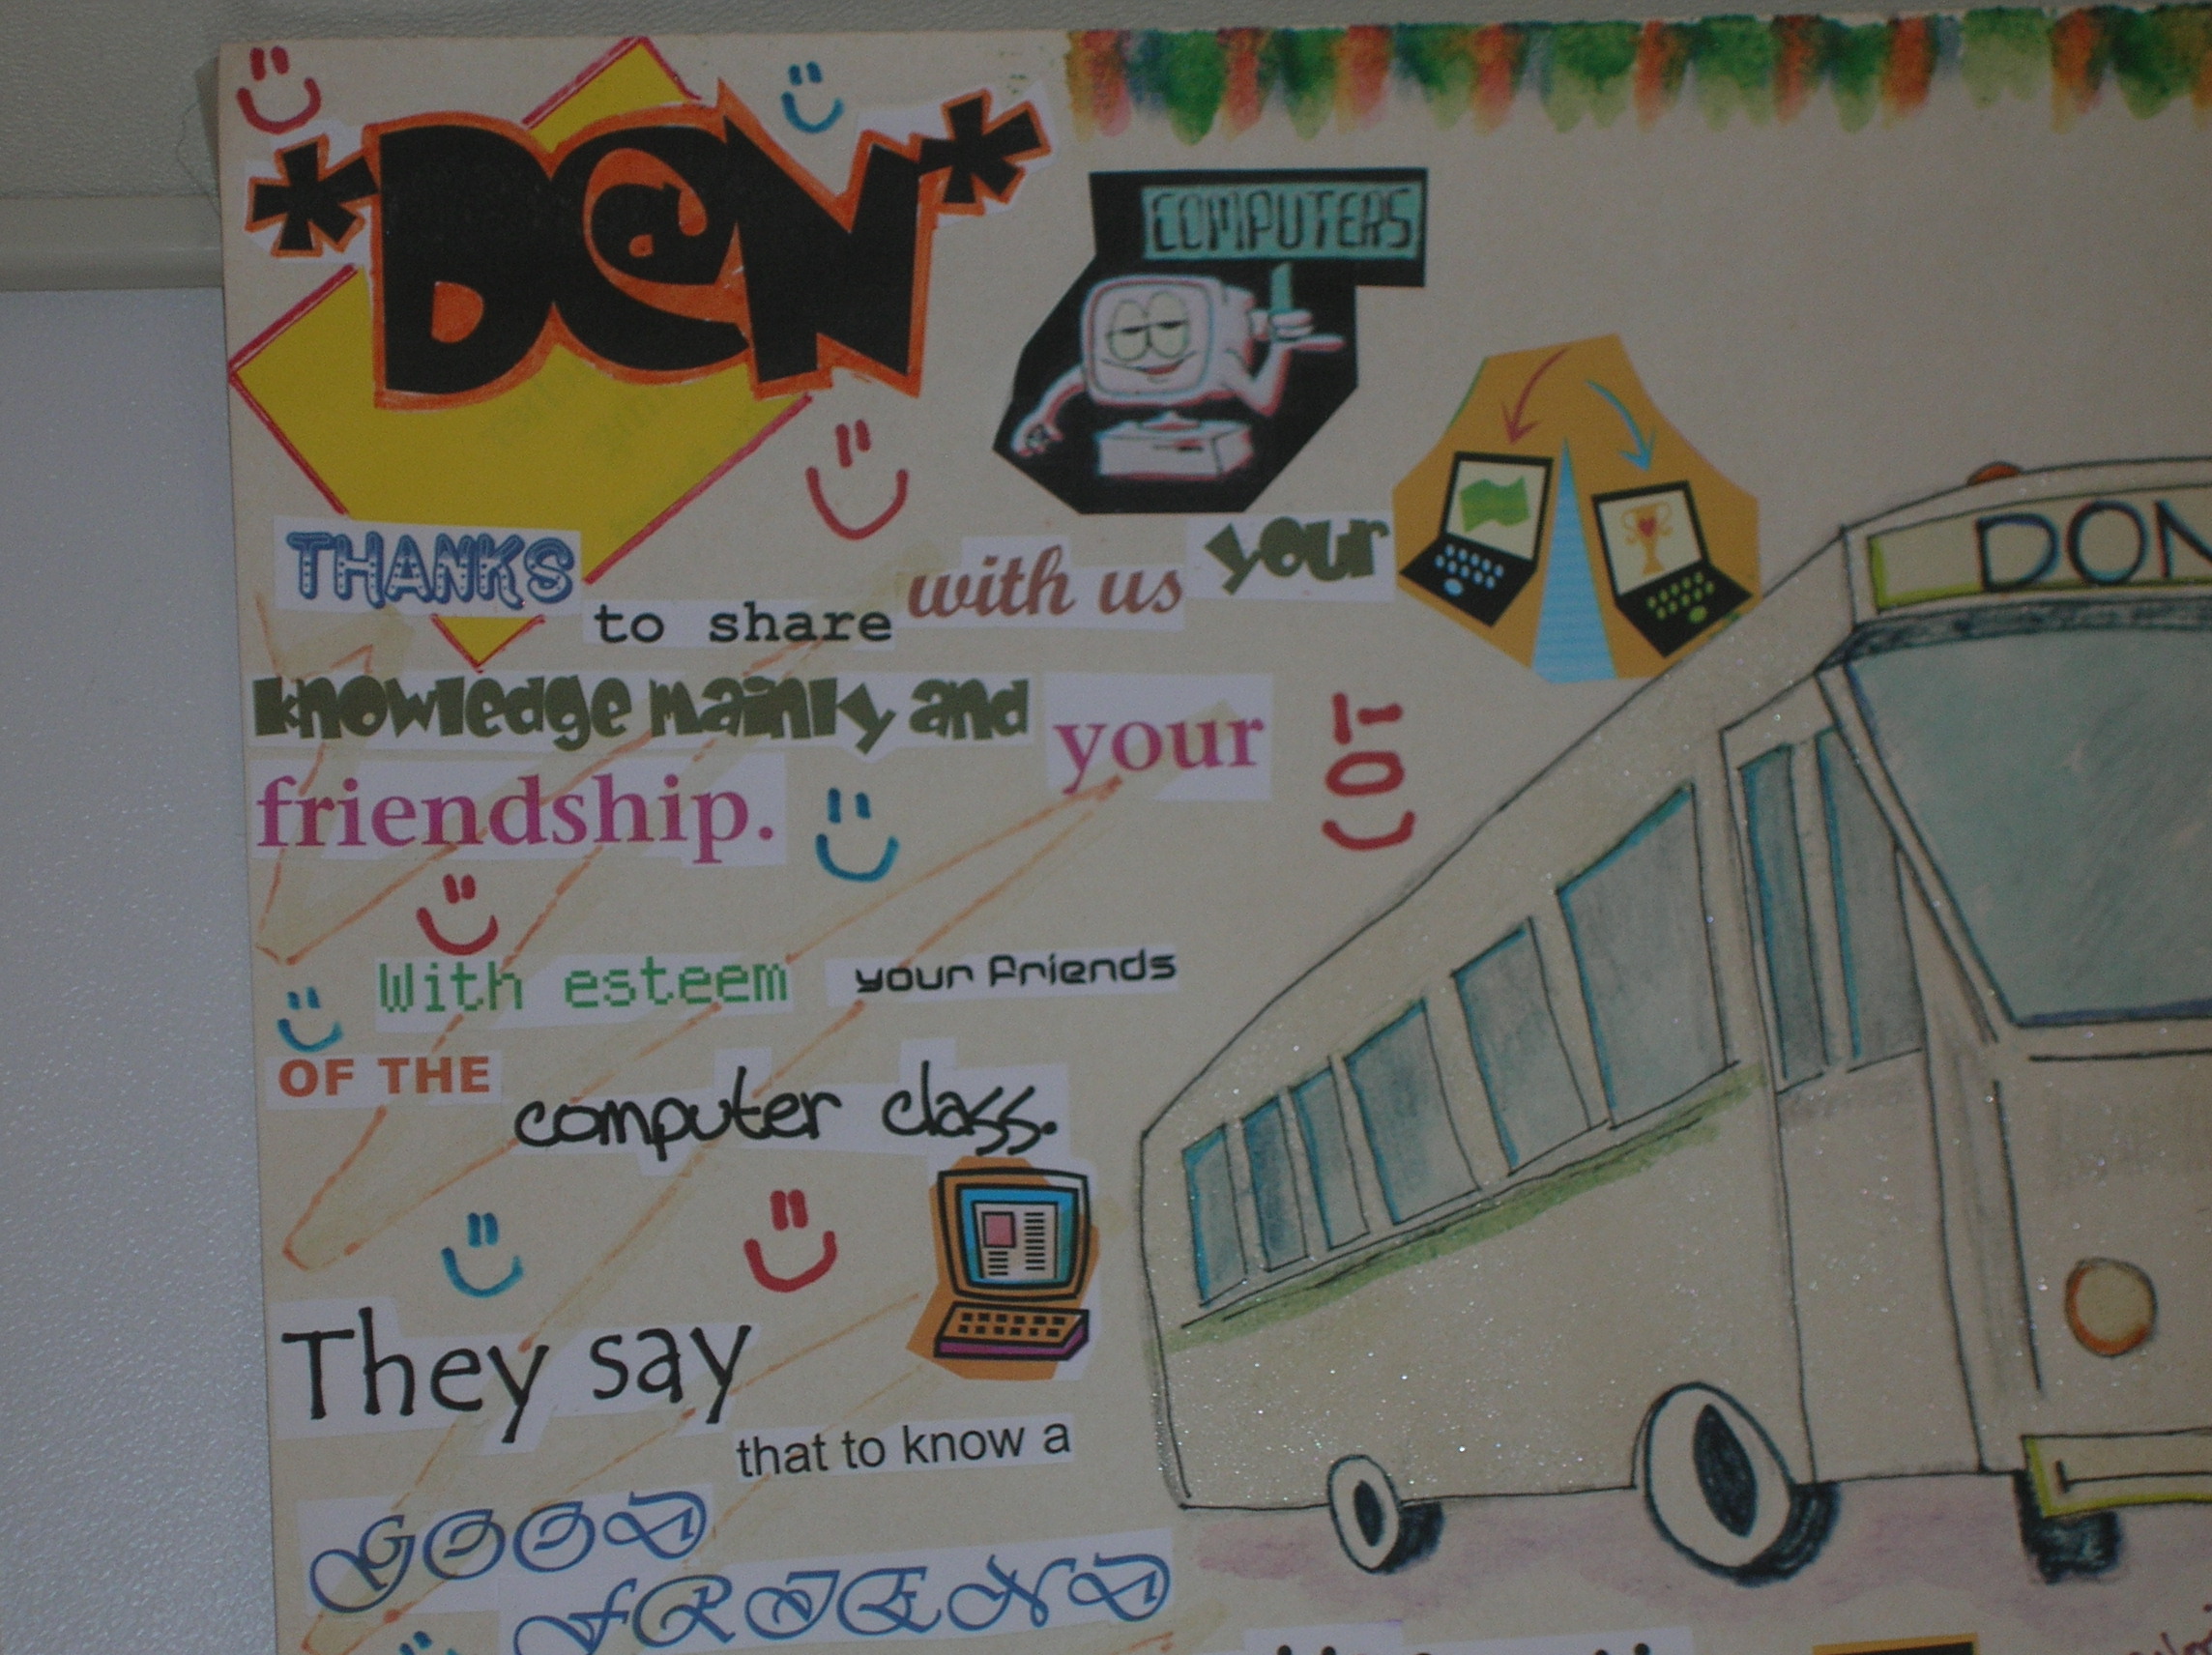 Don’s Bus Thank You Poster